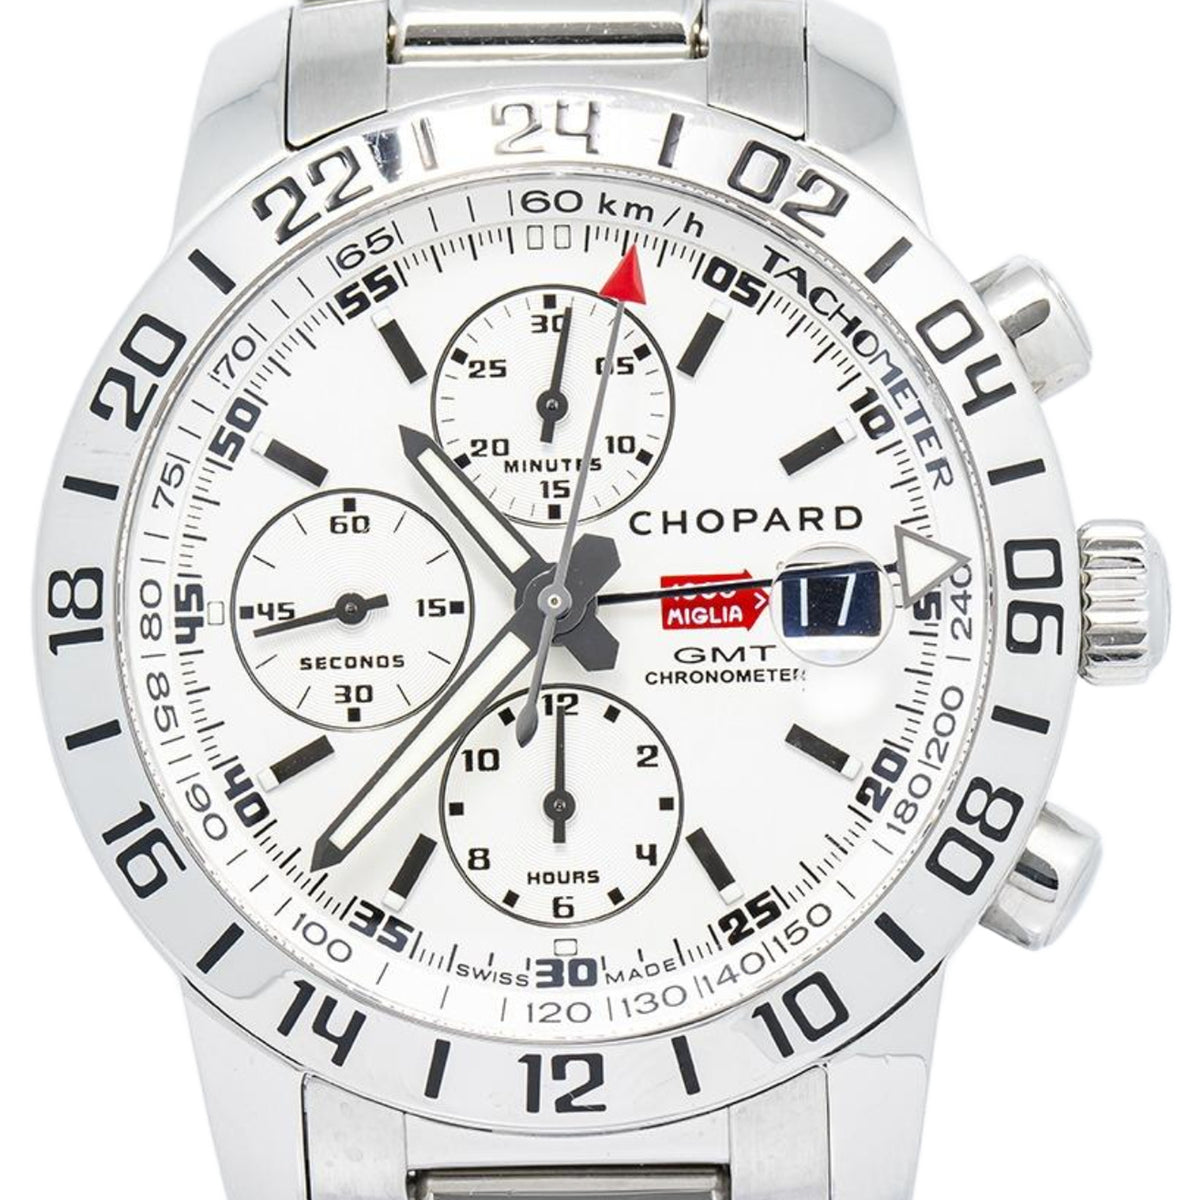 Chopard Mille Miglia 8992 GMT Chronograph Stainless Steel Auto Men's Watch 42mm